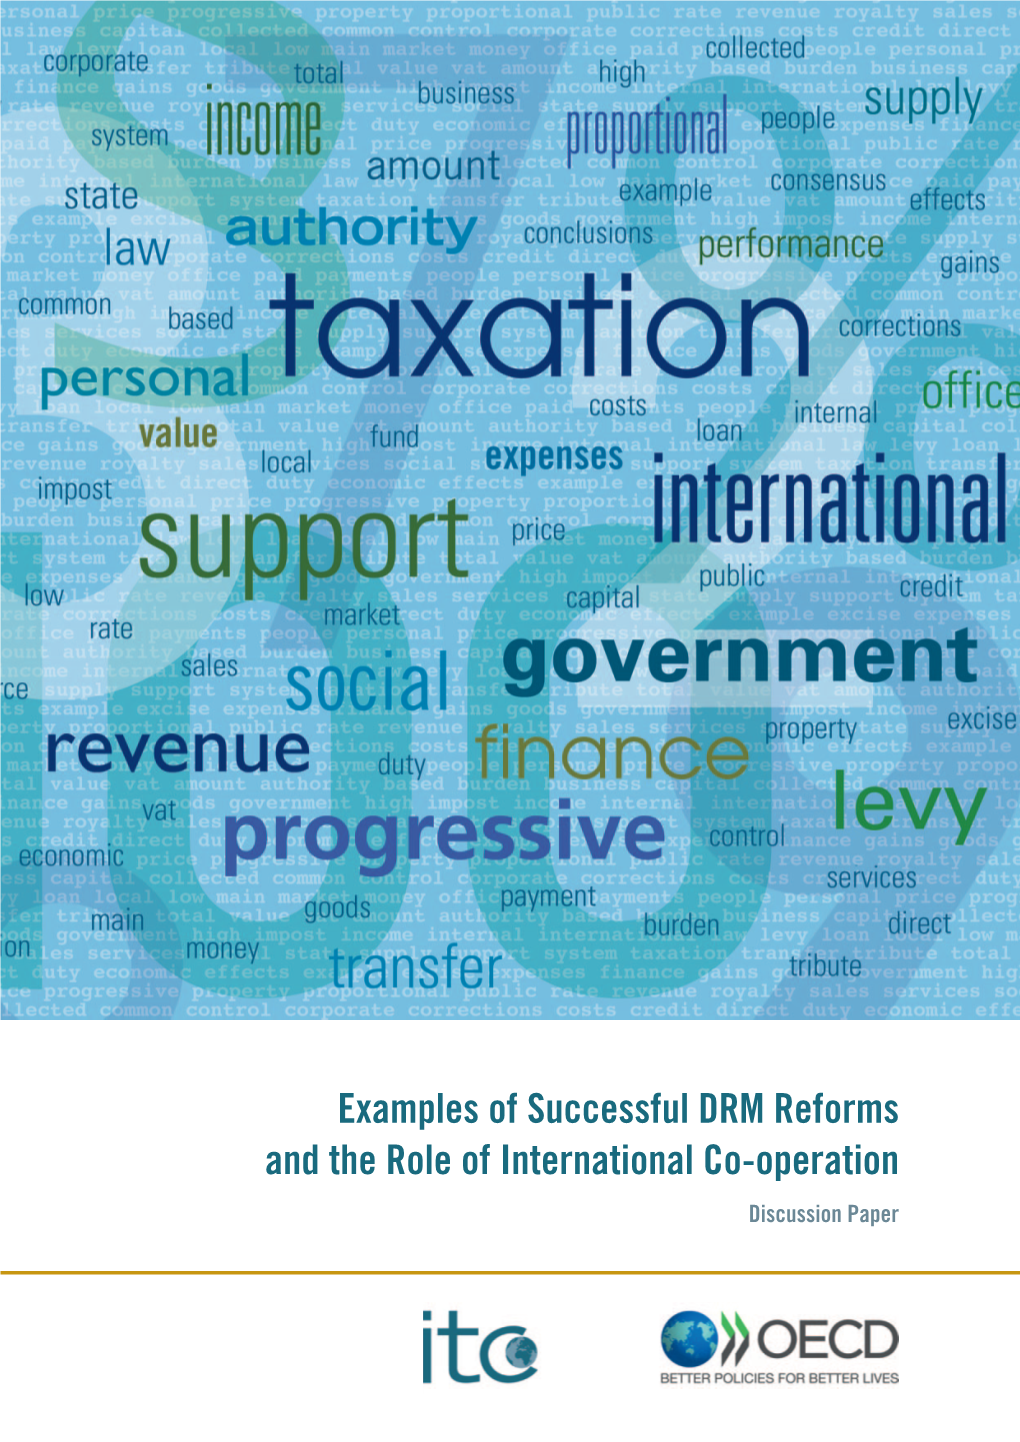 Examples of Successful DRM Reforms and the Role of International Co-Operation Discussion Paper